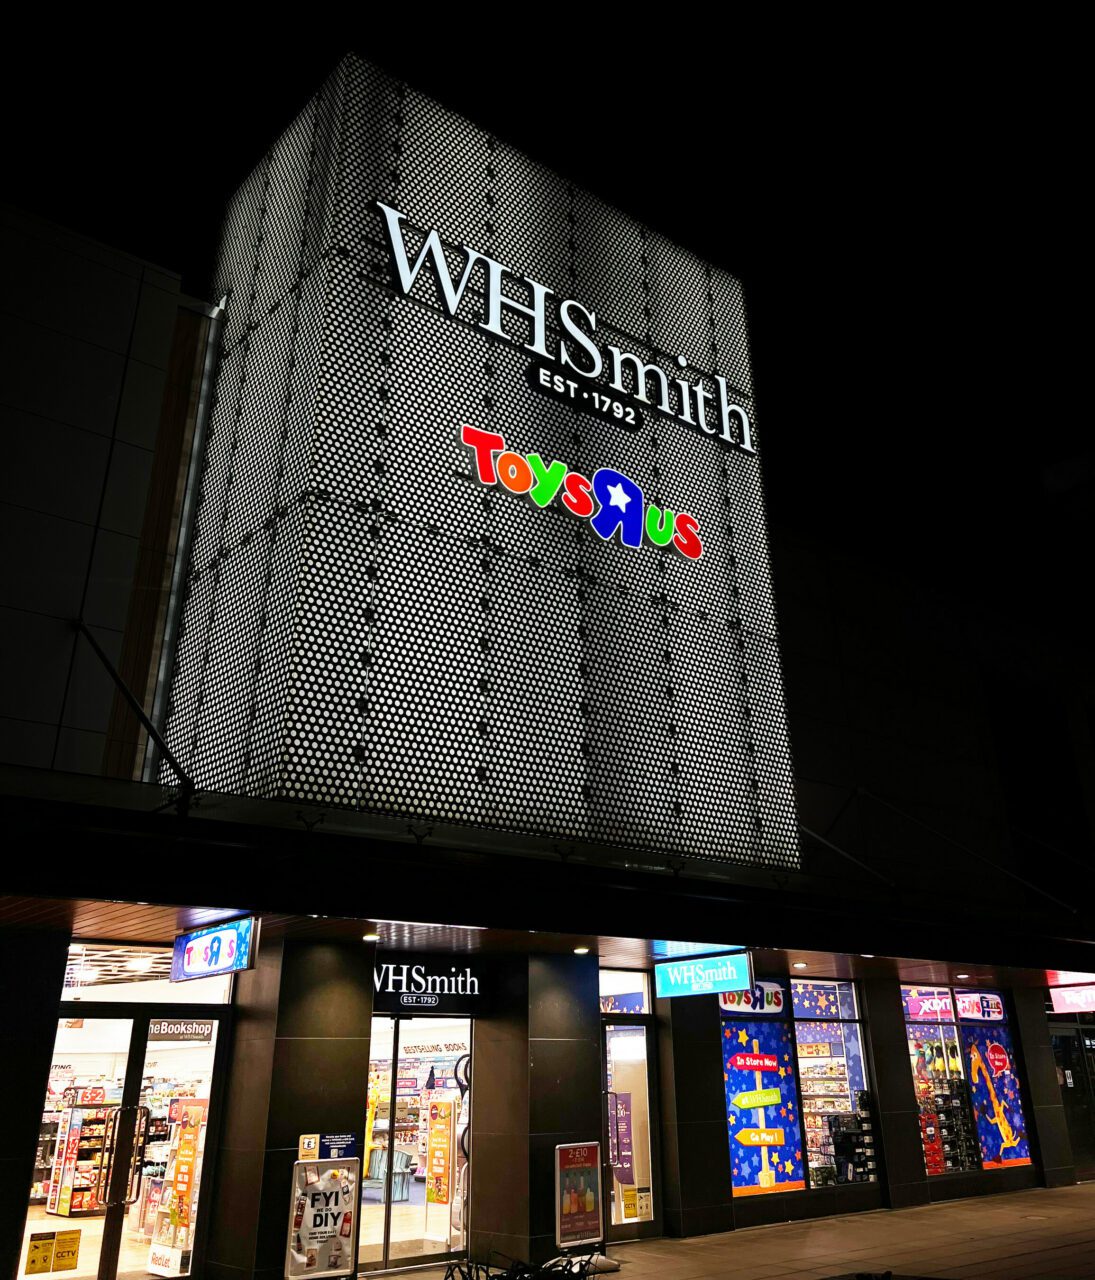 A Toys 'R' Us shop-in-shop at WHSmith in the UK.